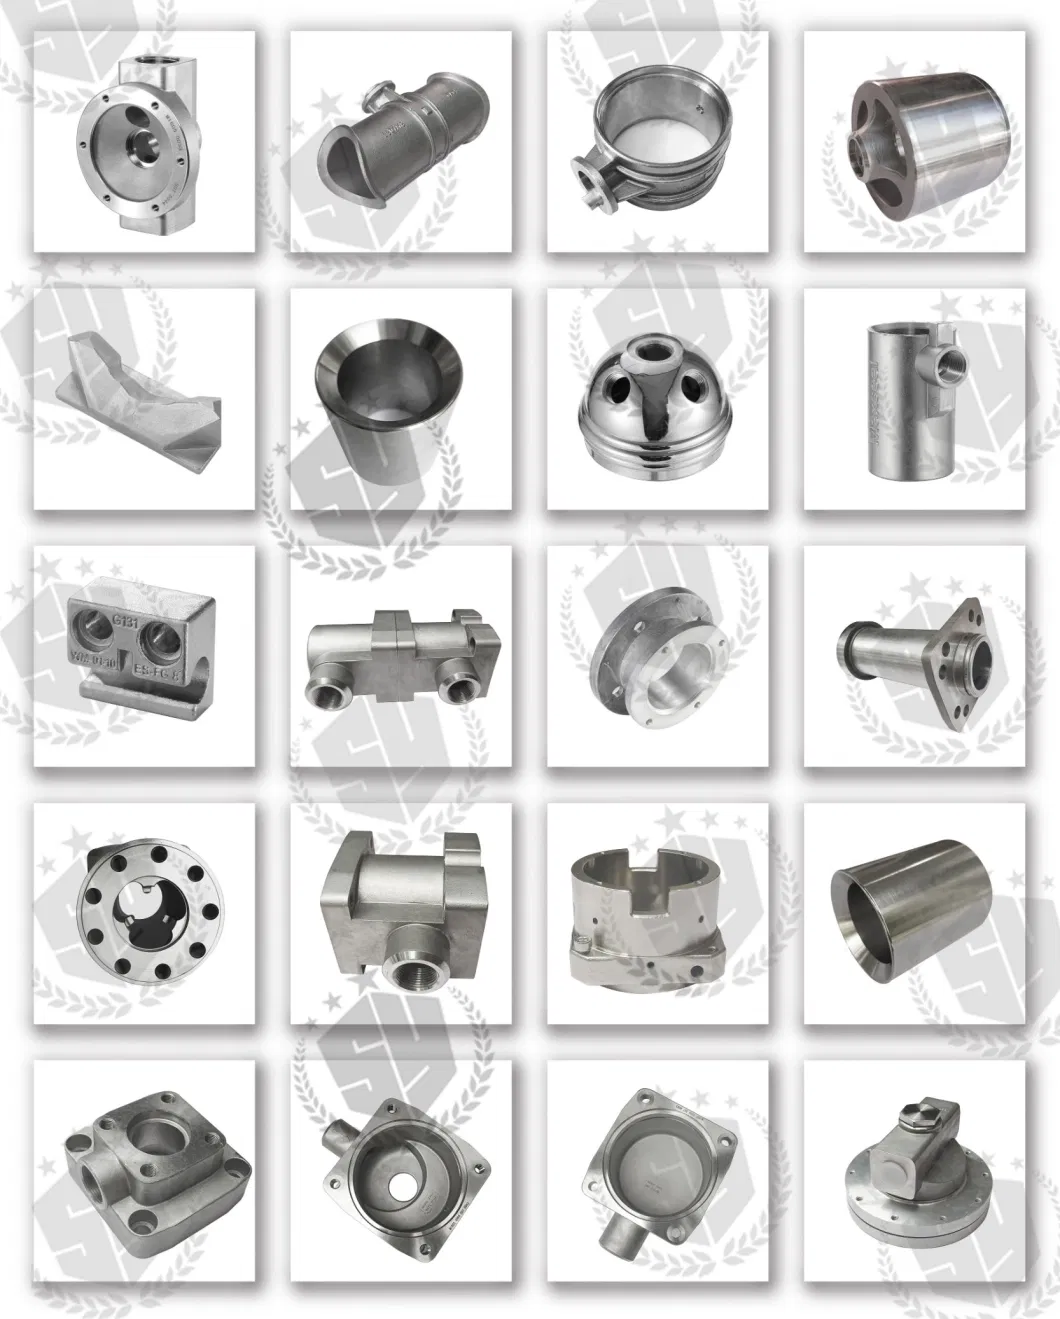 OEM High Precision Investment Casting Lost Casting Company with Steel Stainless Steel Materials